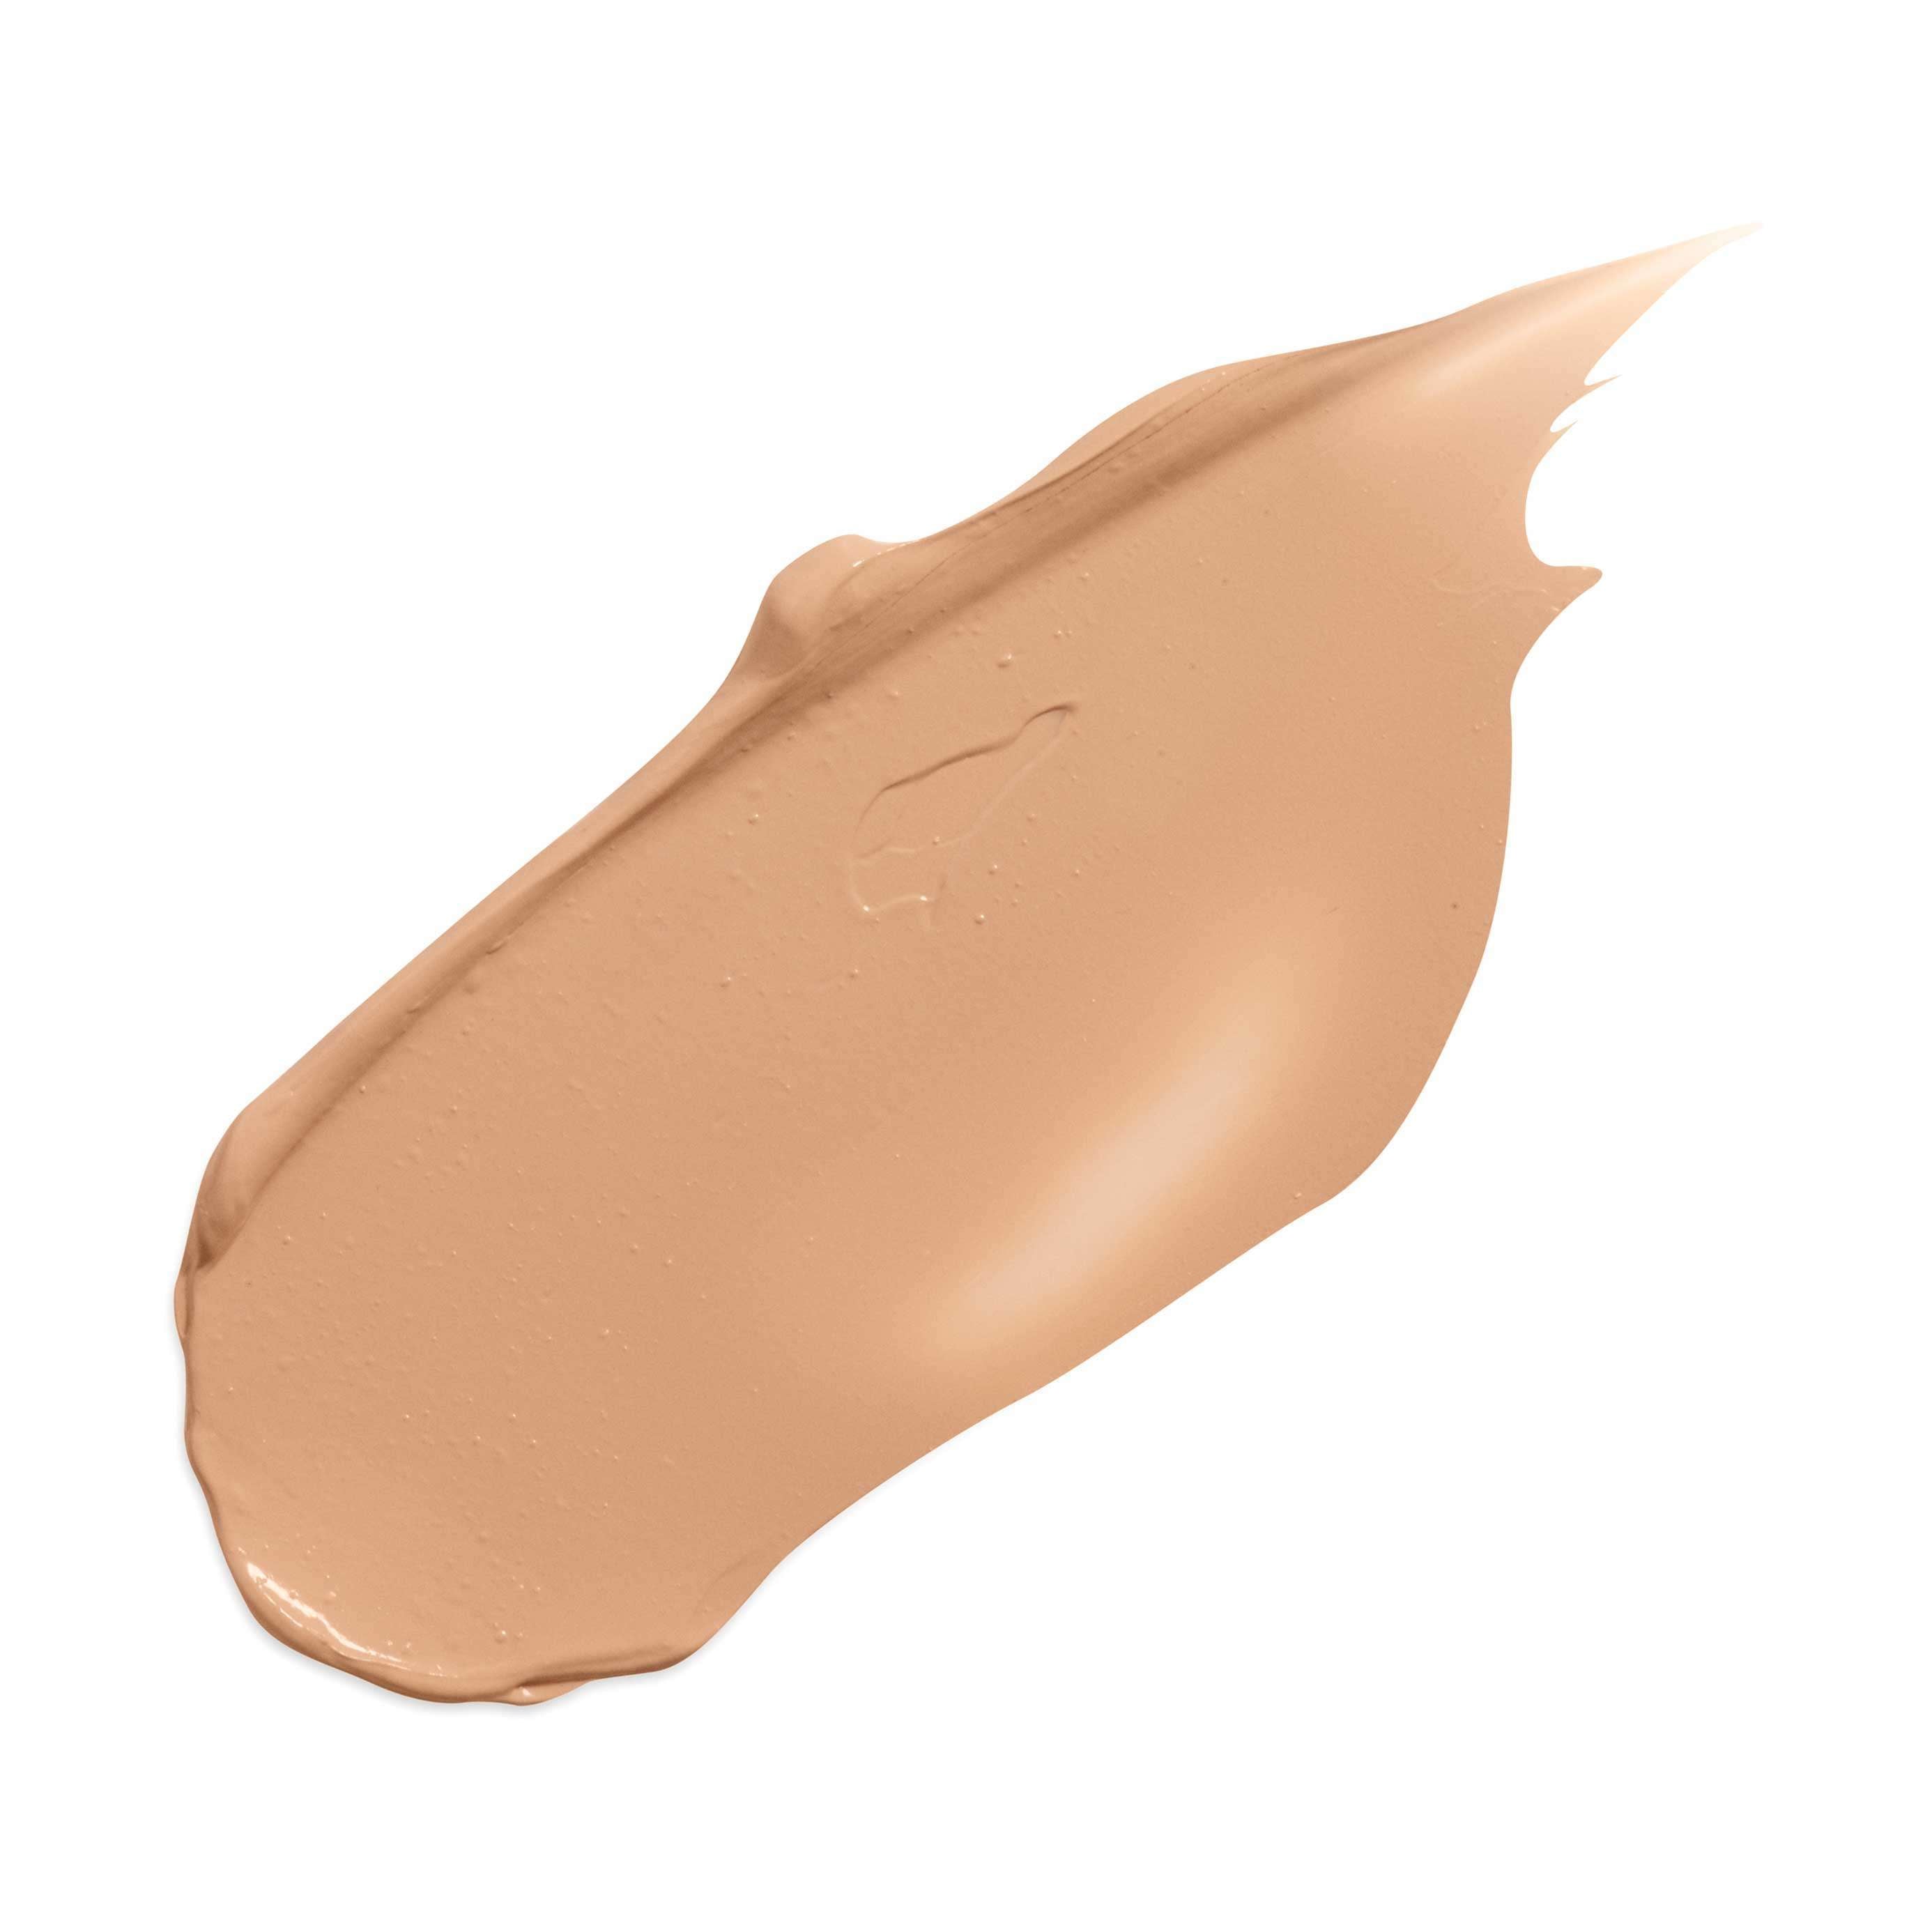 Jane Iredale Disappear™ Full Coverage Concealer, Medium Light Disappear